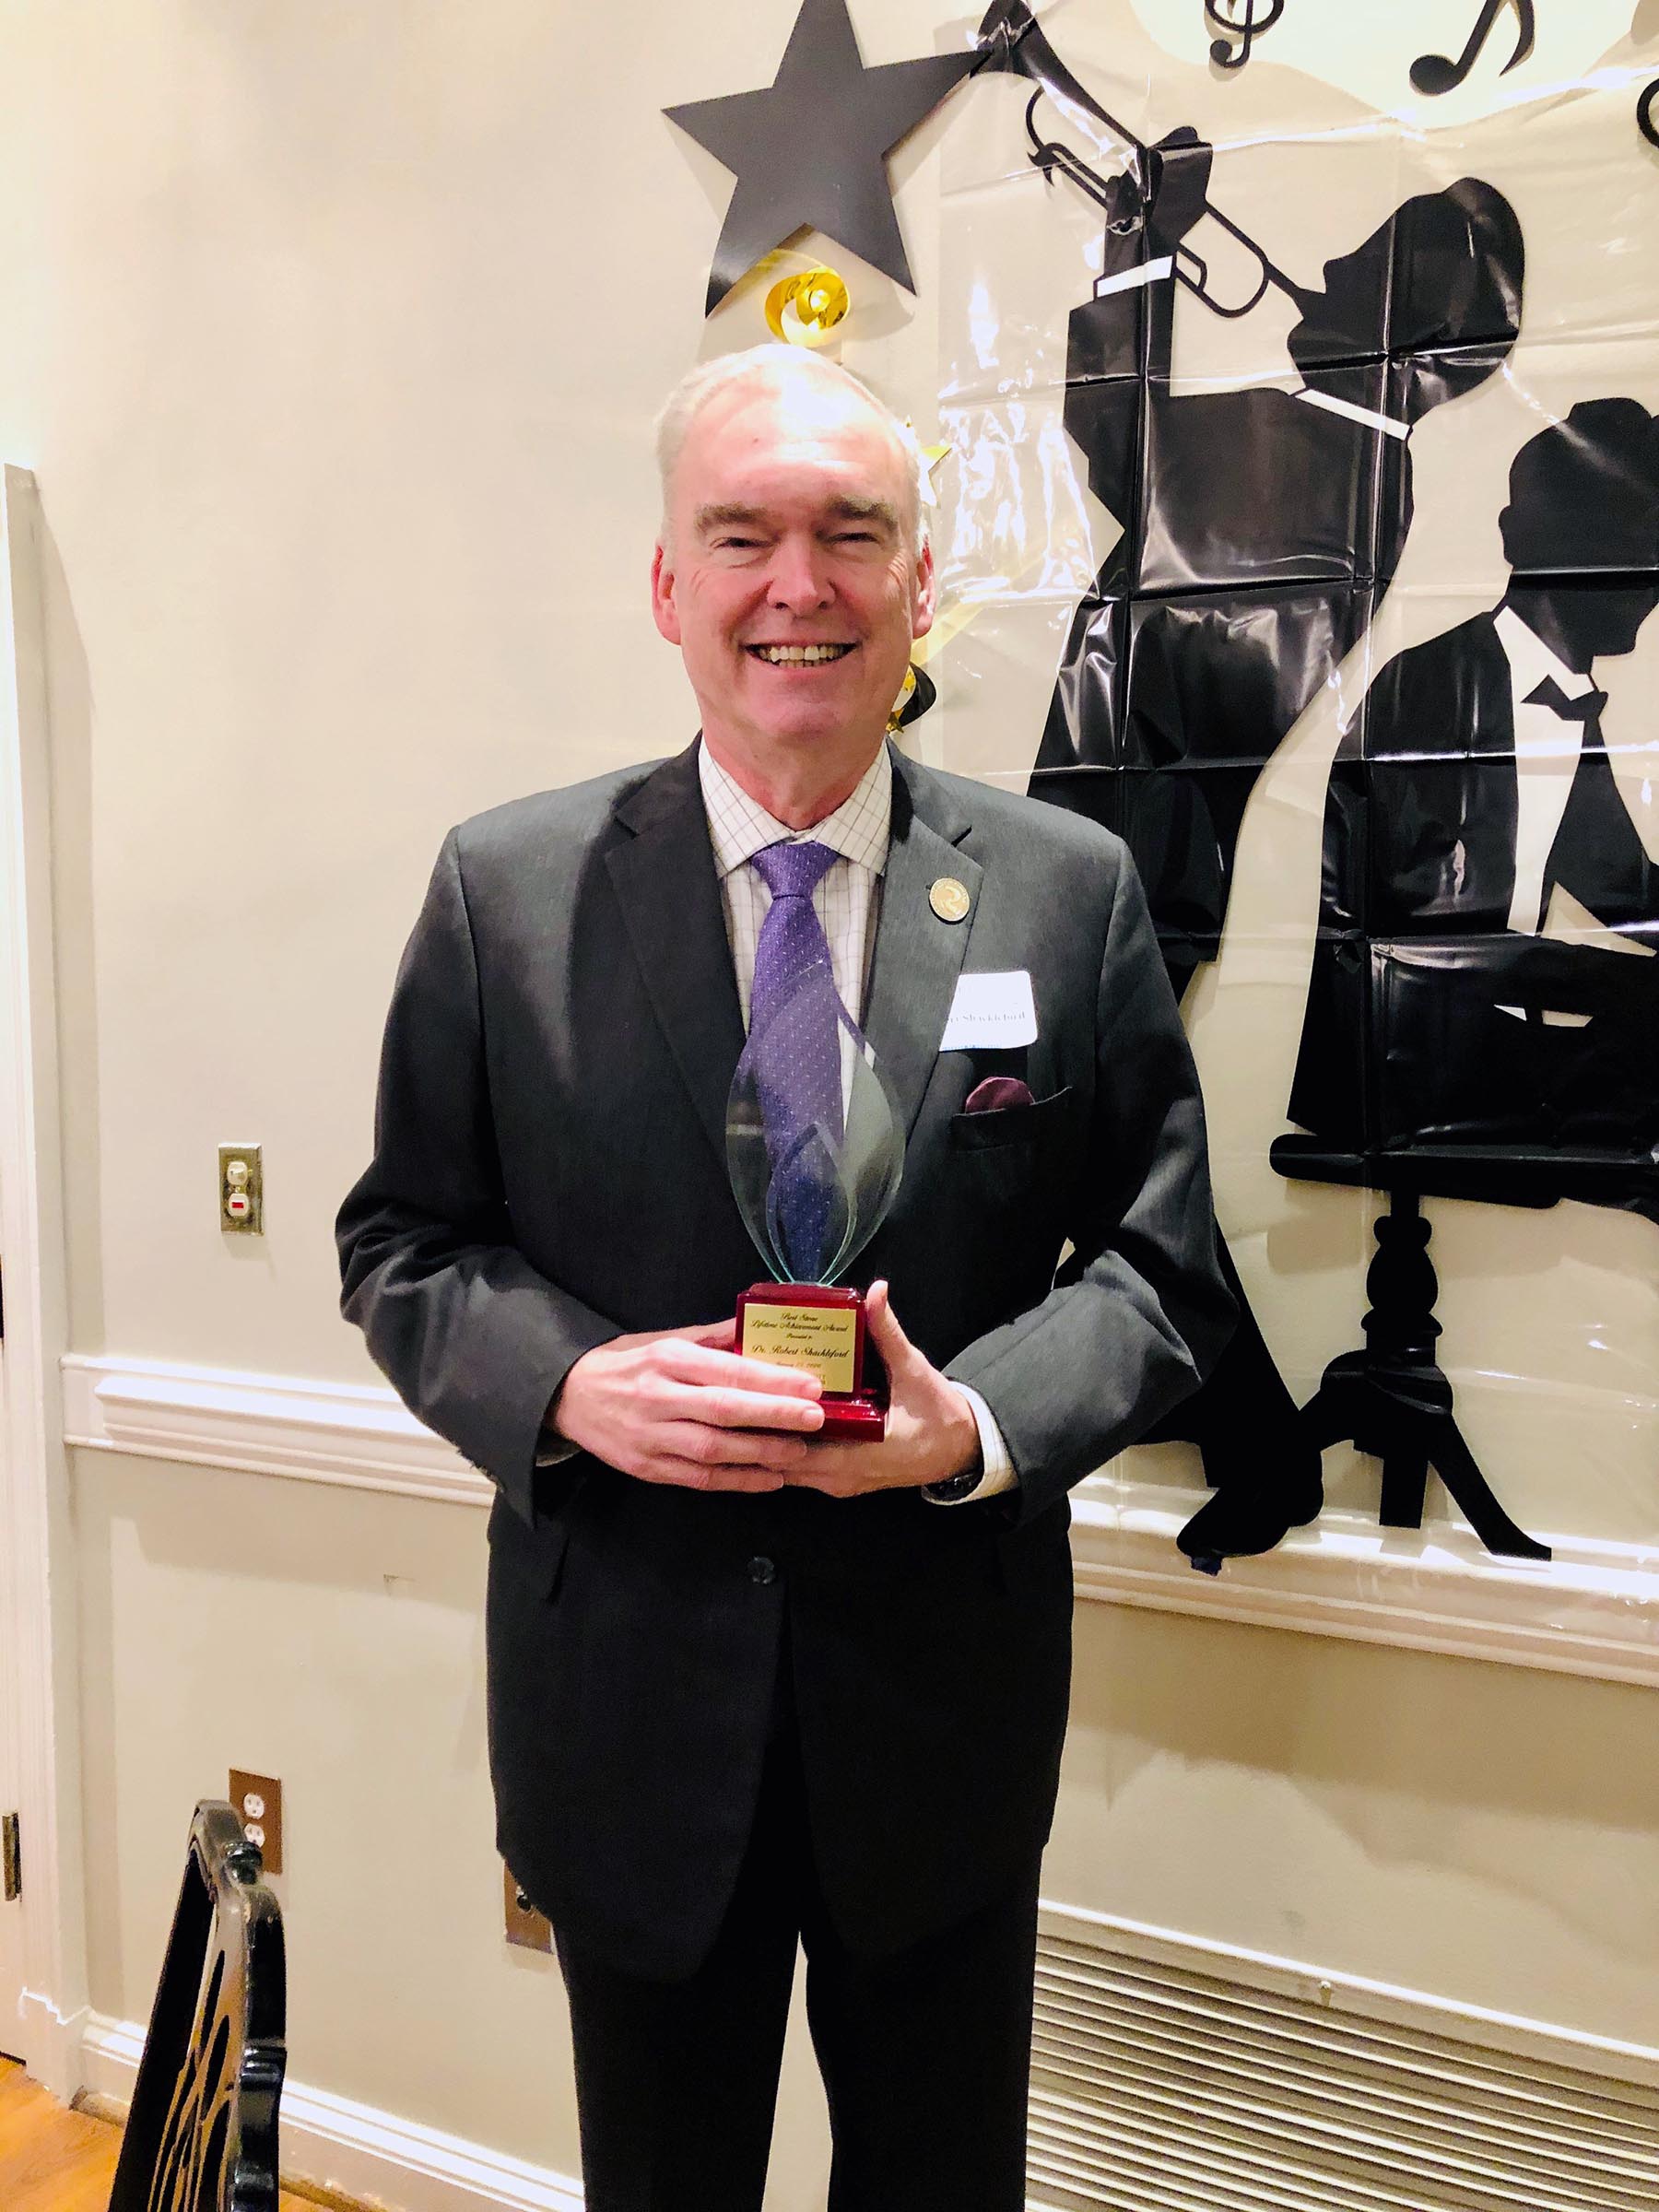 Randolph Community College President Dr. Robert S. Shackleford Jr. was presented with the first-ever Bert Lance-Stone Lifetime Achievement Award on Thursday, Jan. 23, at the Archdale-Trinity Chamber of Commerce’s 38th Annual Membership Meeting at Colonial Country Club in Thomasville.